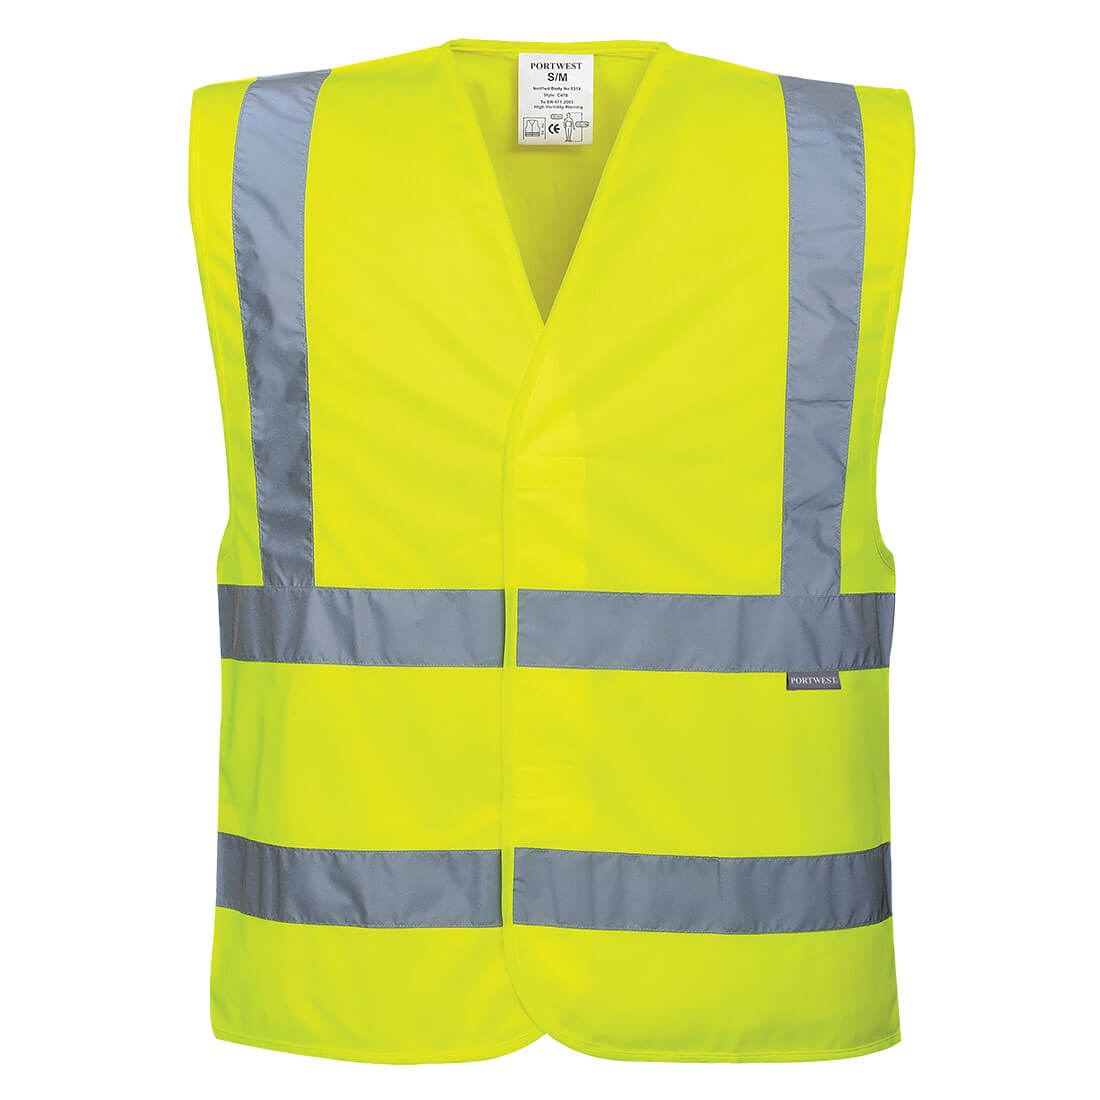 Image of Portwest Two Band and Brace Class 2 Hi Vis Waistcoat Yellow 6XL / 7XL